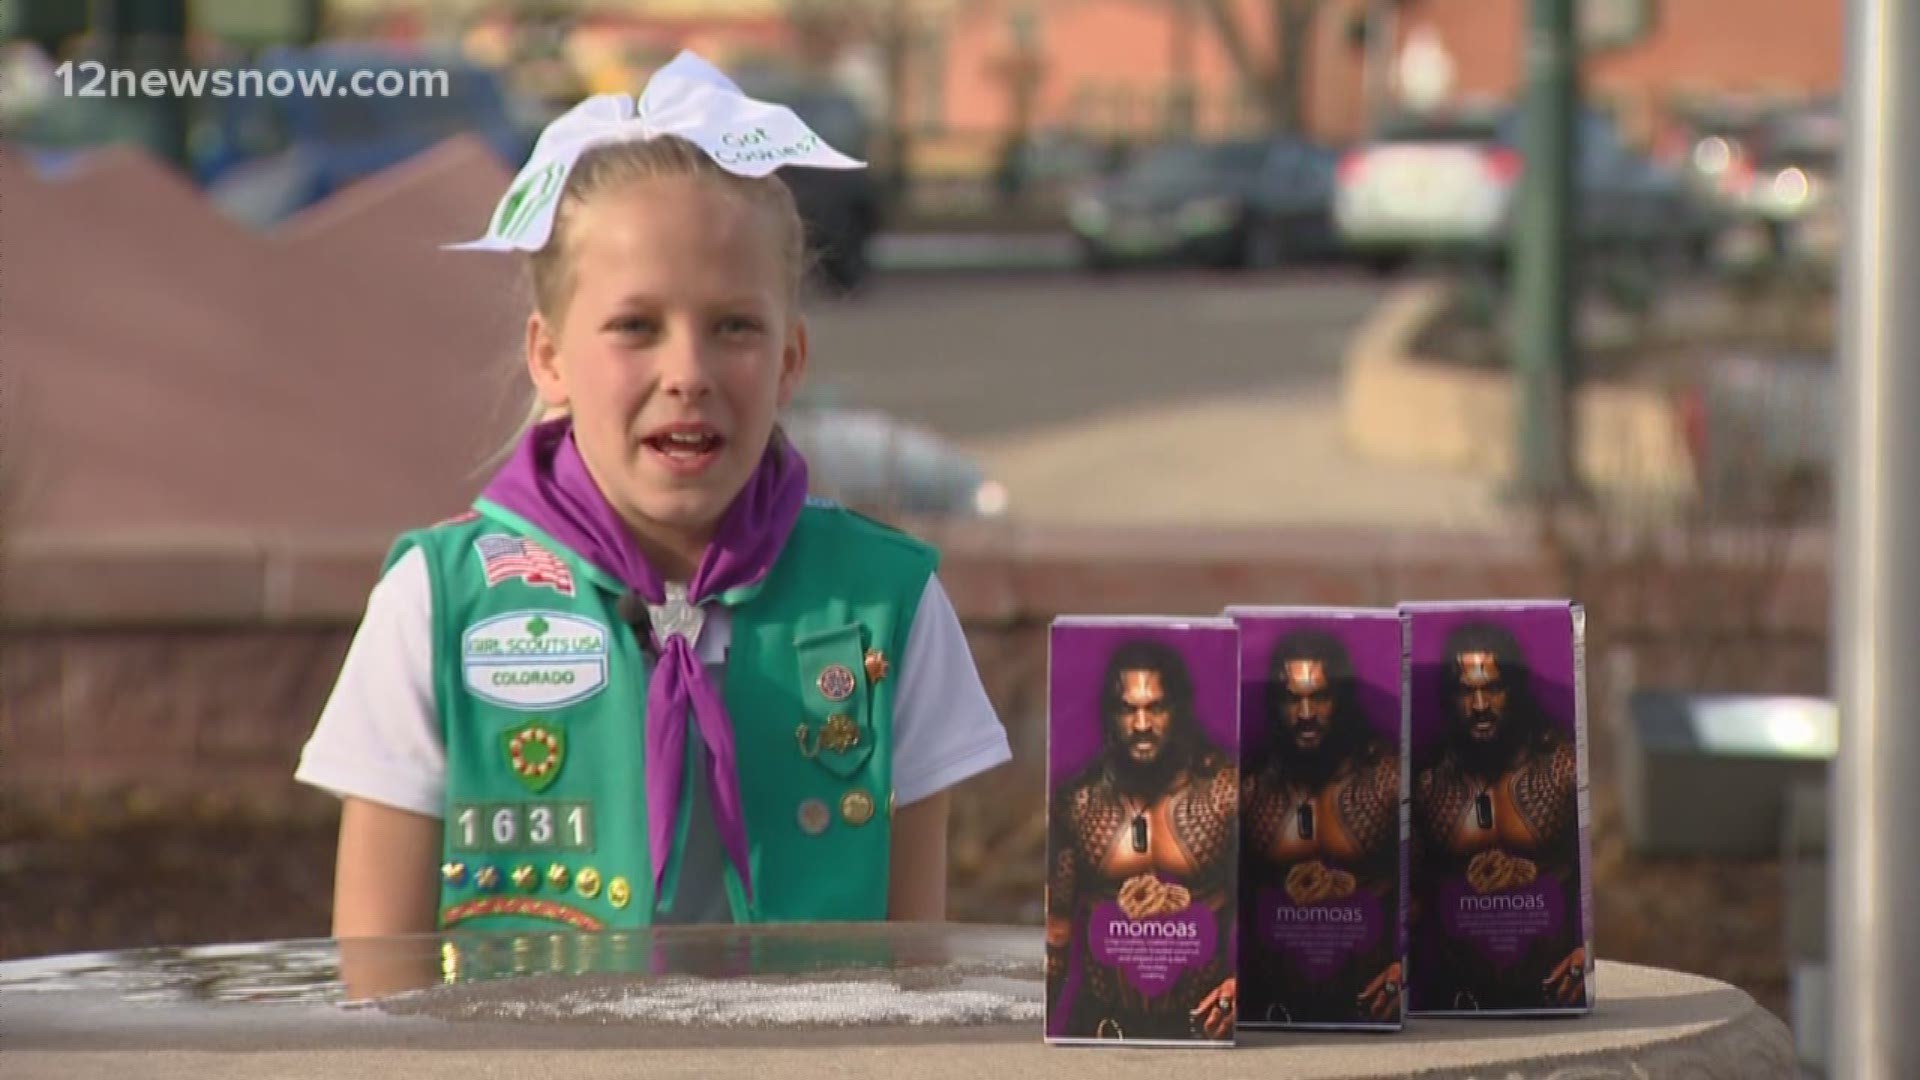 Charlotte and her mother got to work printing out the pictures of Jason Momoa and gluing them on dozens of boxes of girl scout cookies.